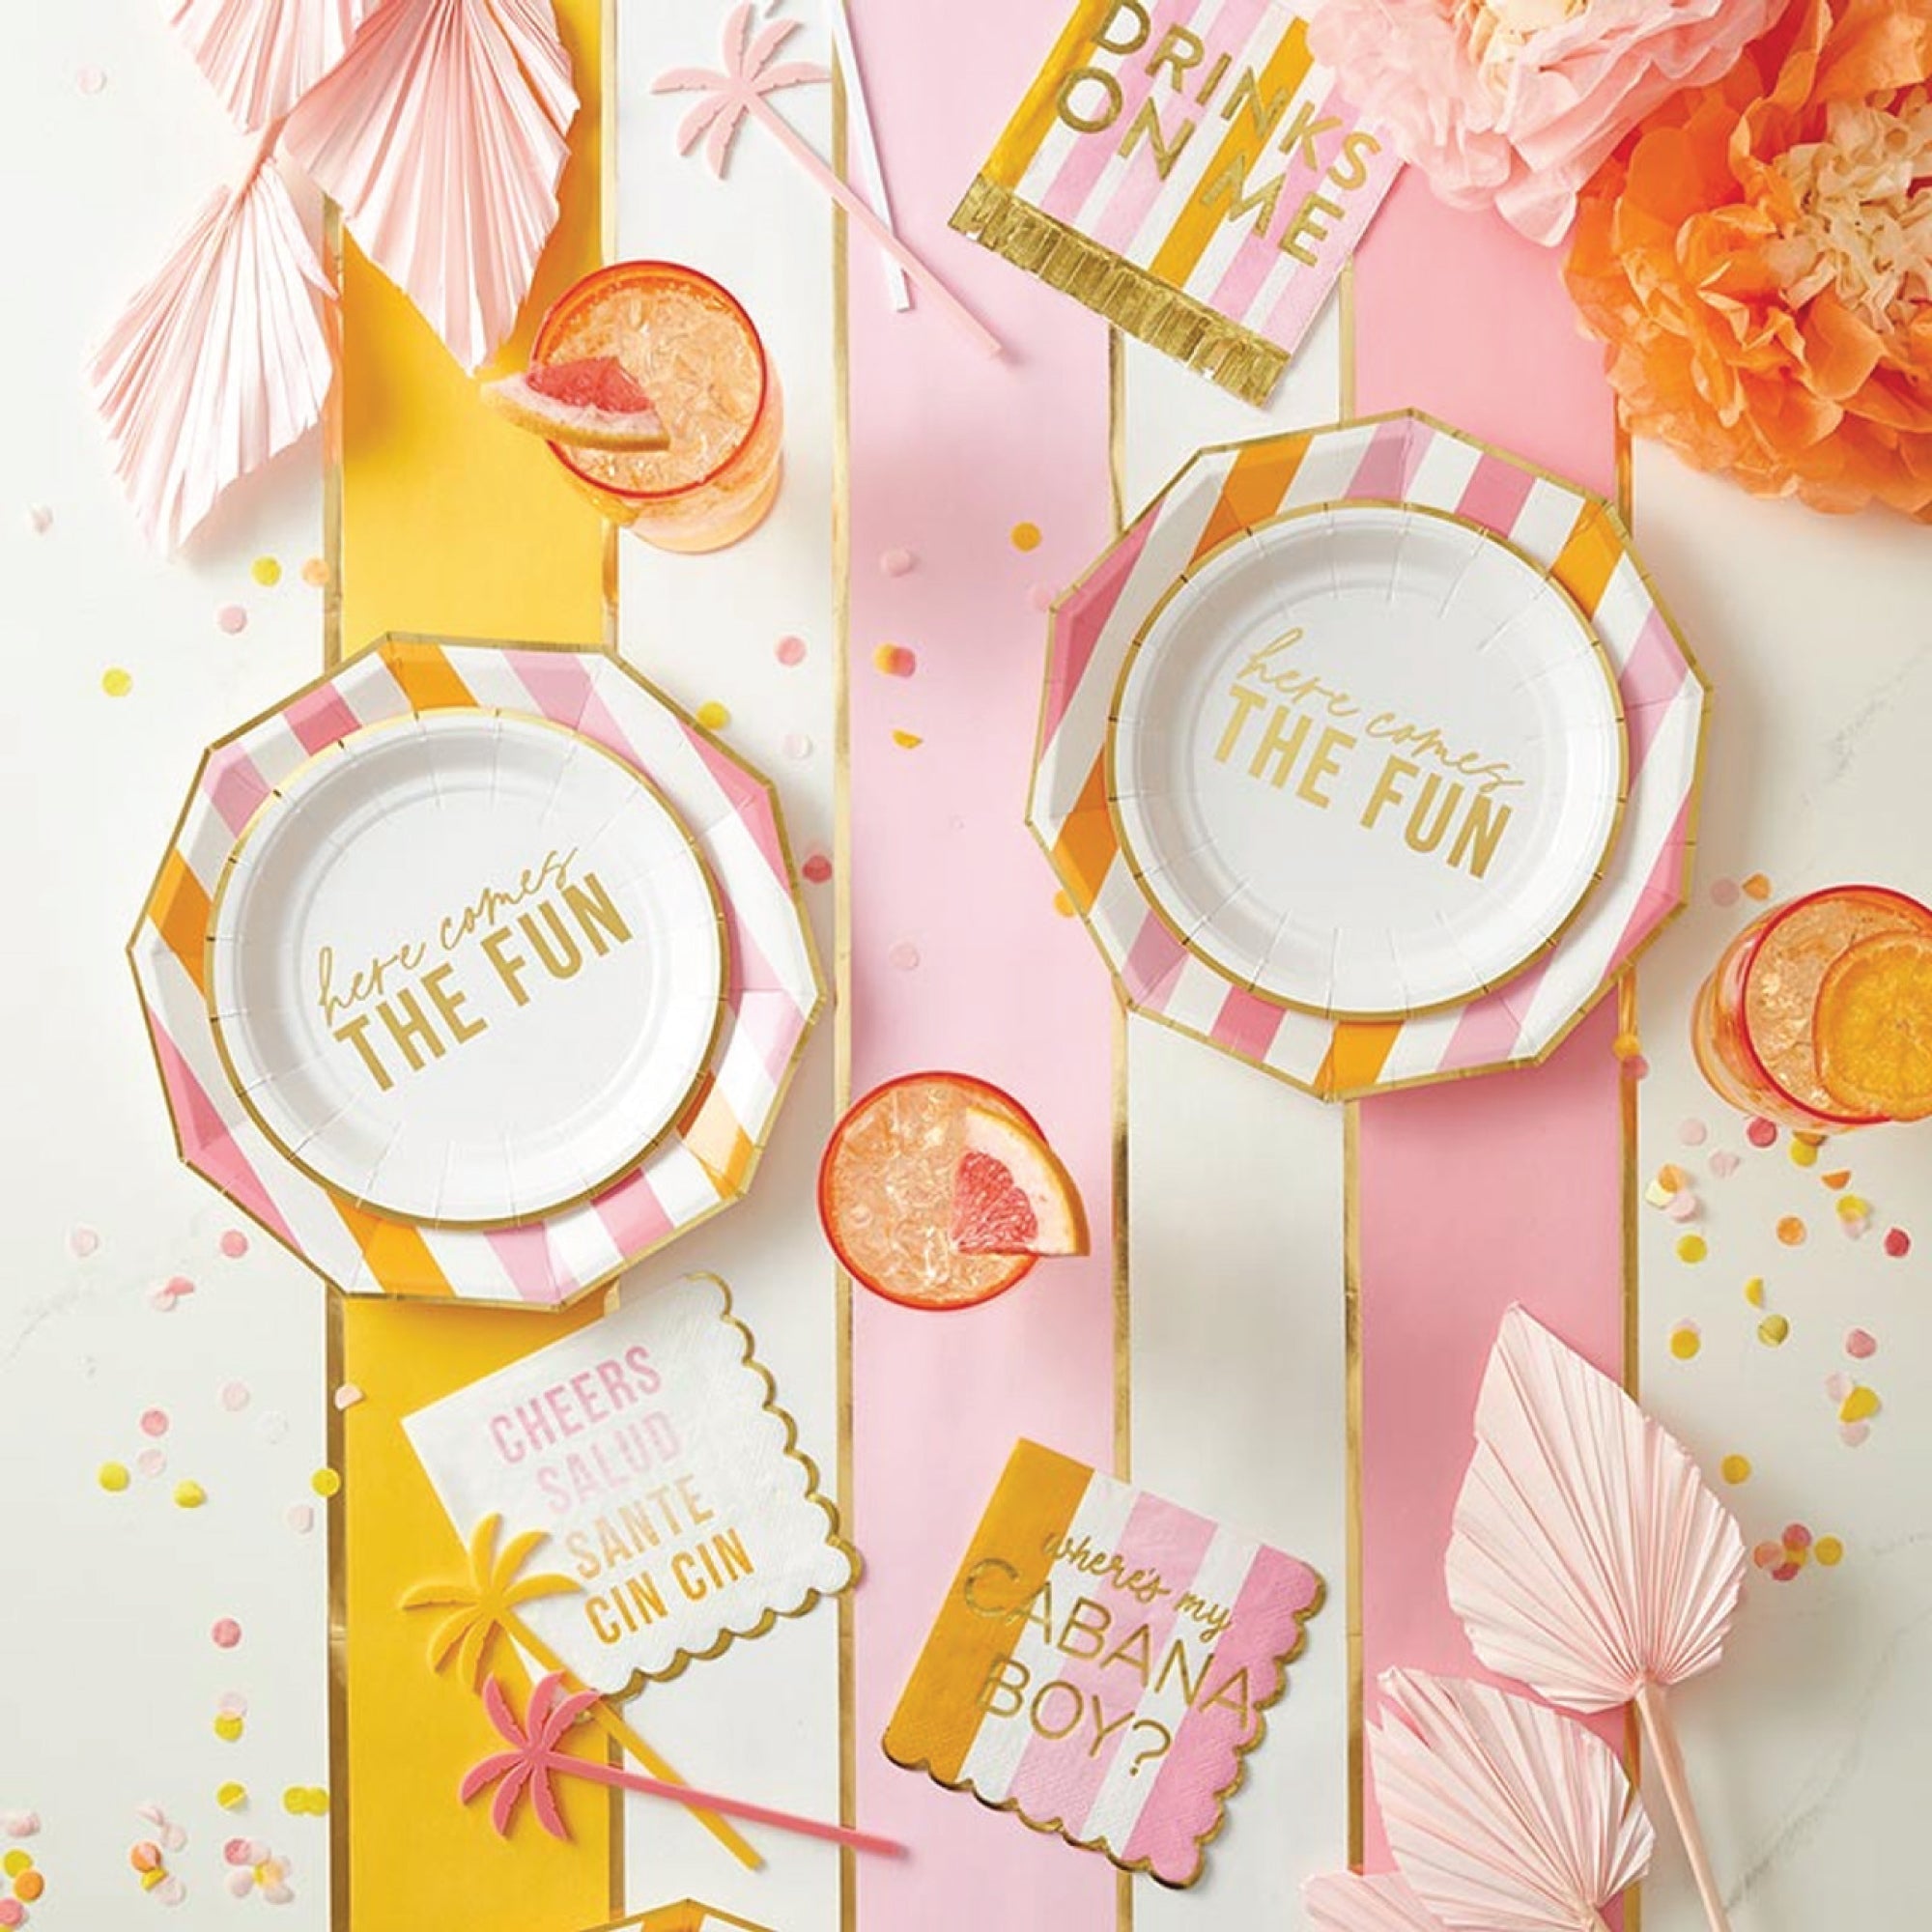 Sunshine & Cocktails Acrylic Wine Glasses 4ct | The Party Darling